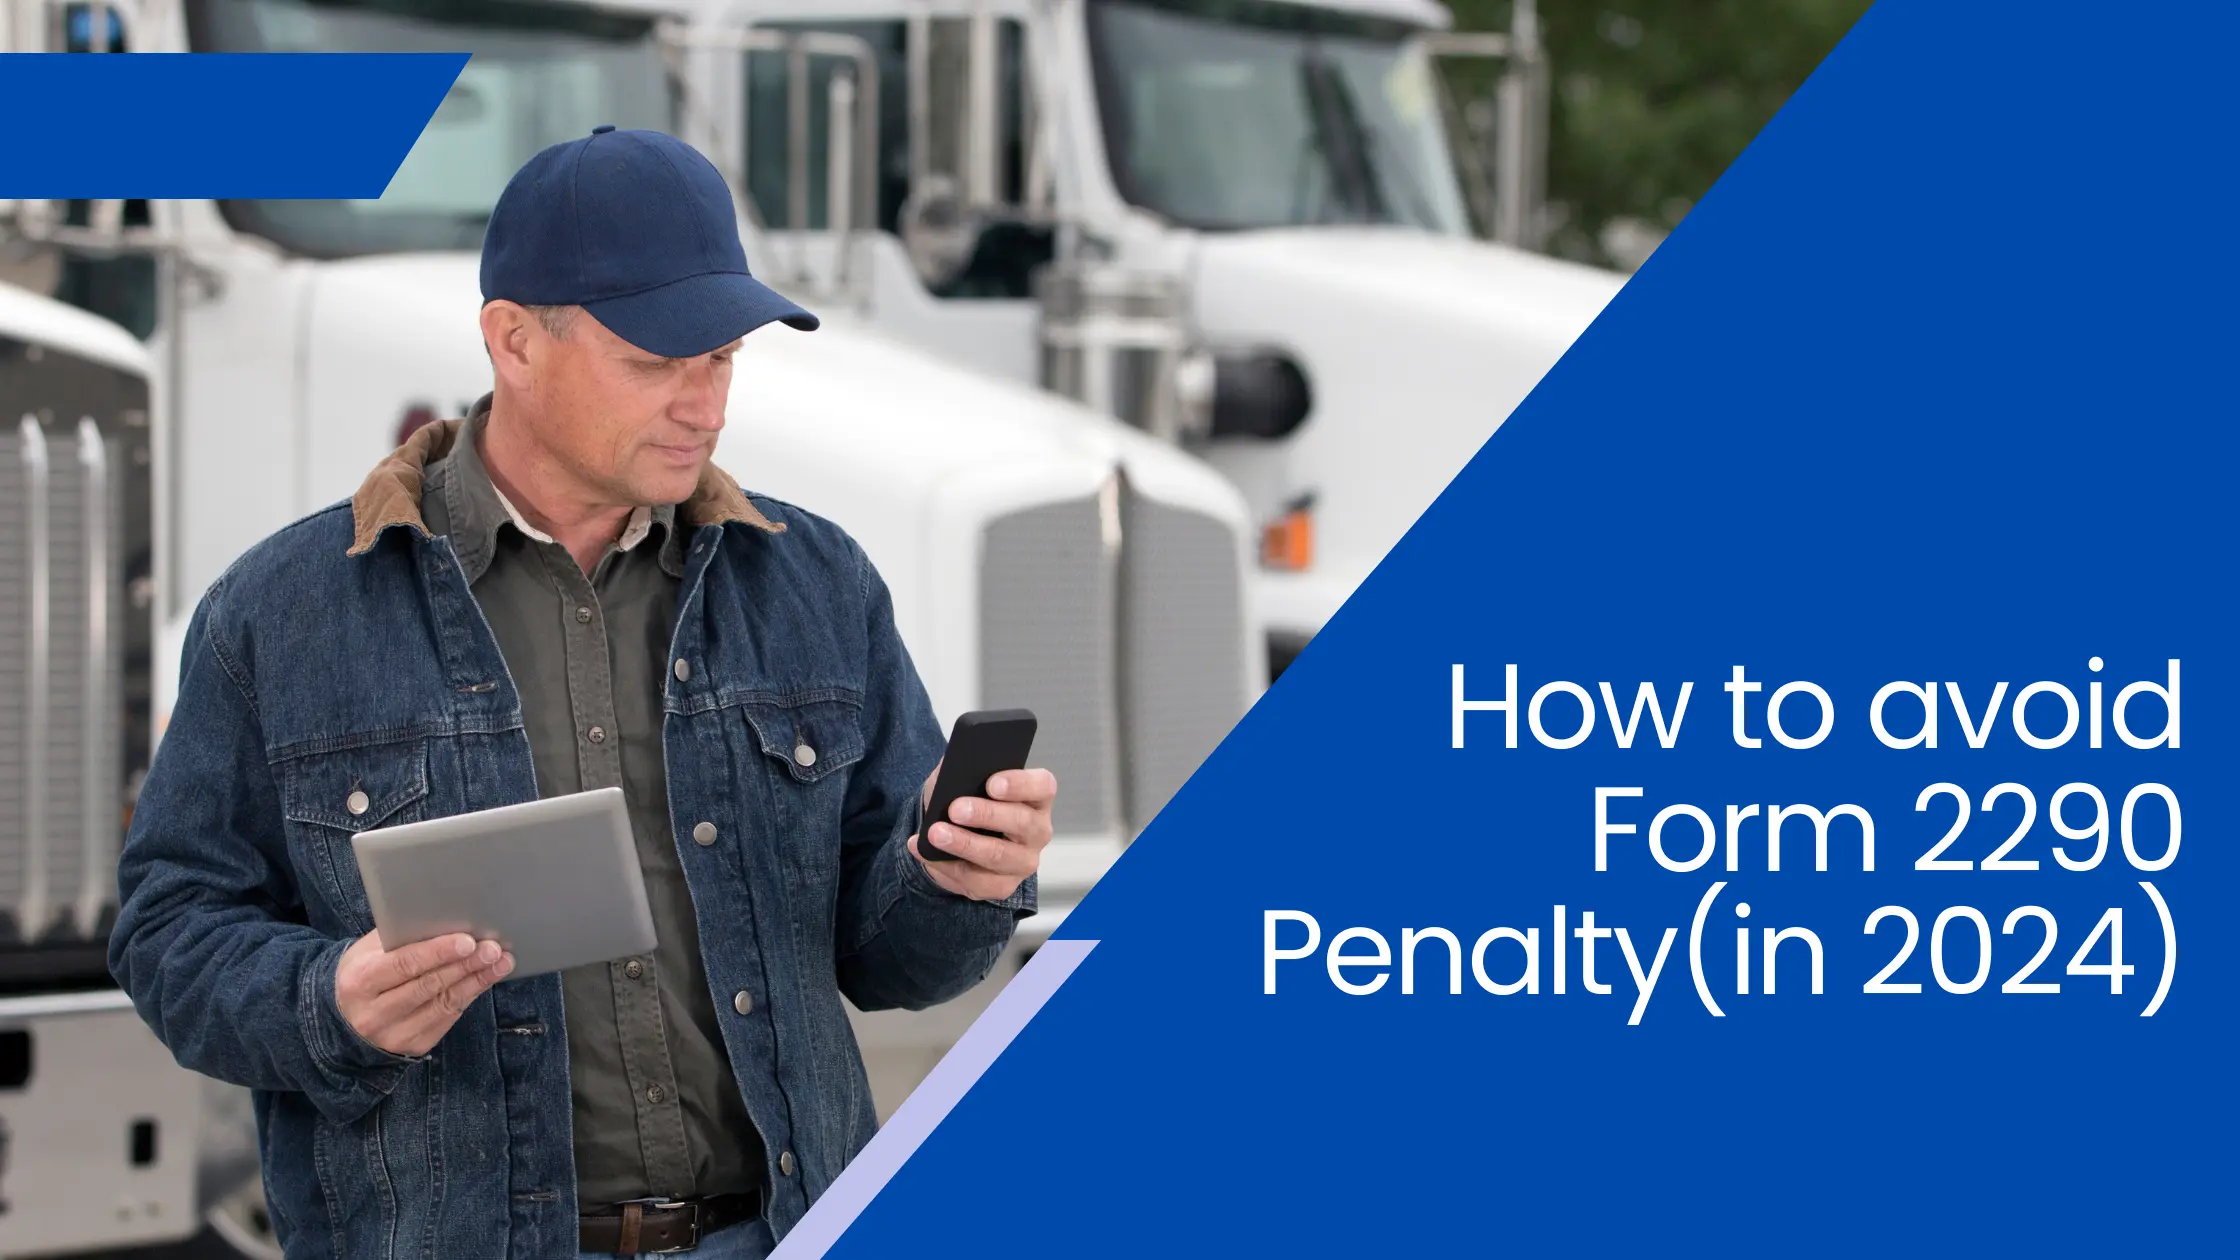 How To Avoid Form 2290 Penalty